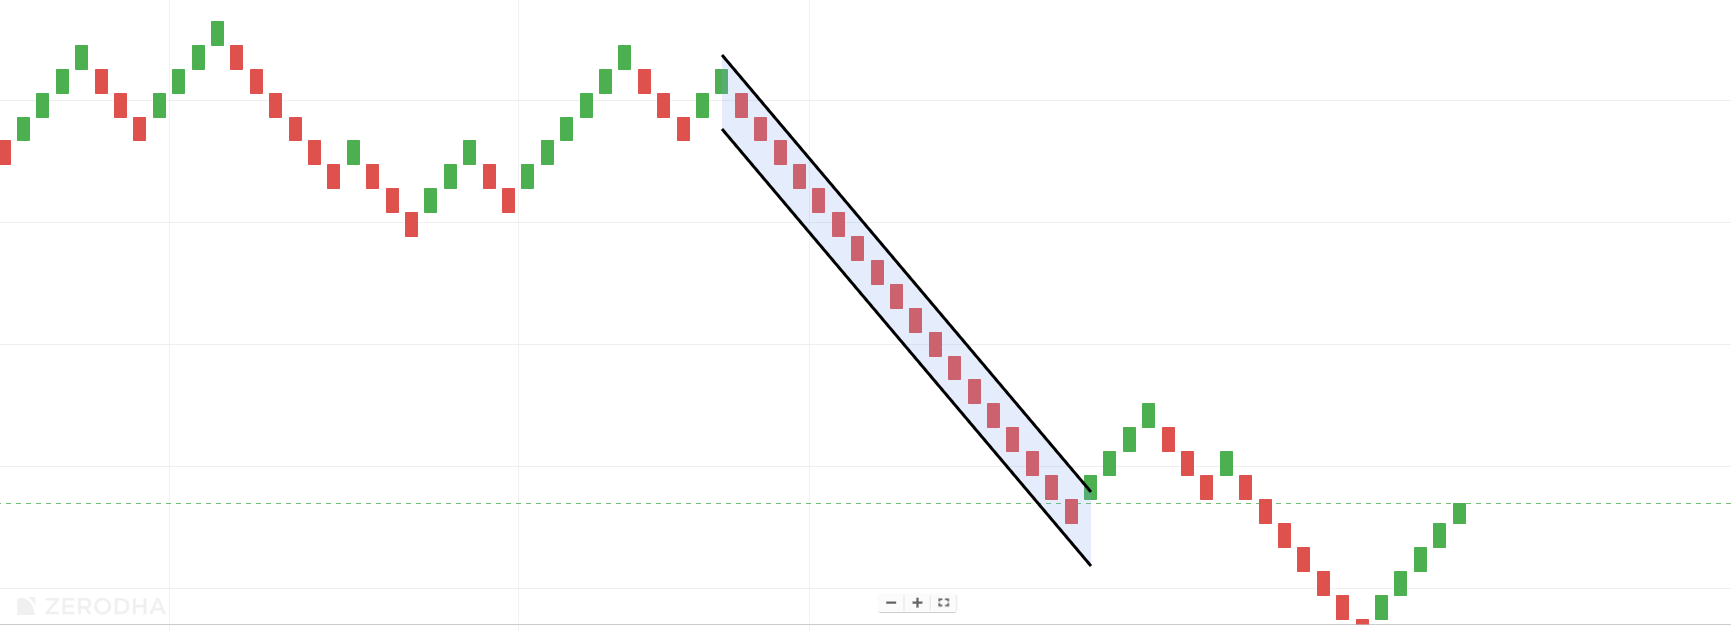 Downtrend ( Trend continuation)